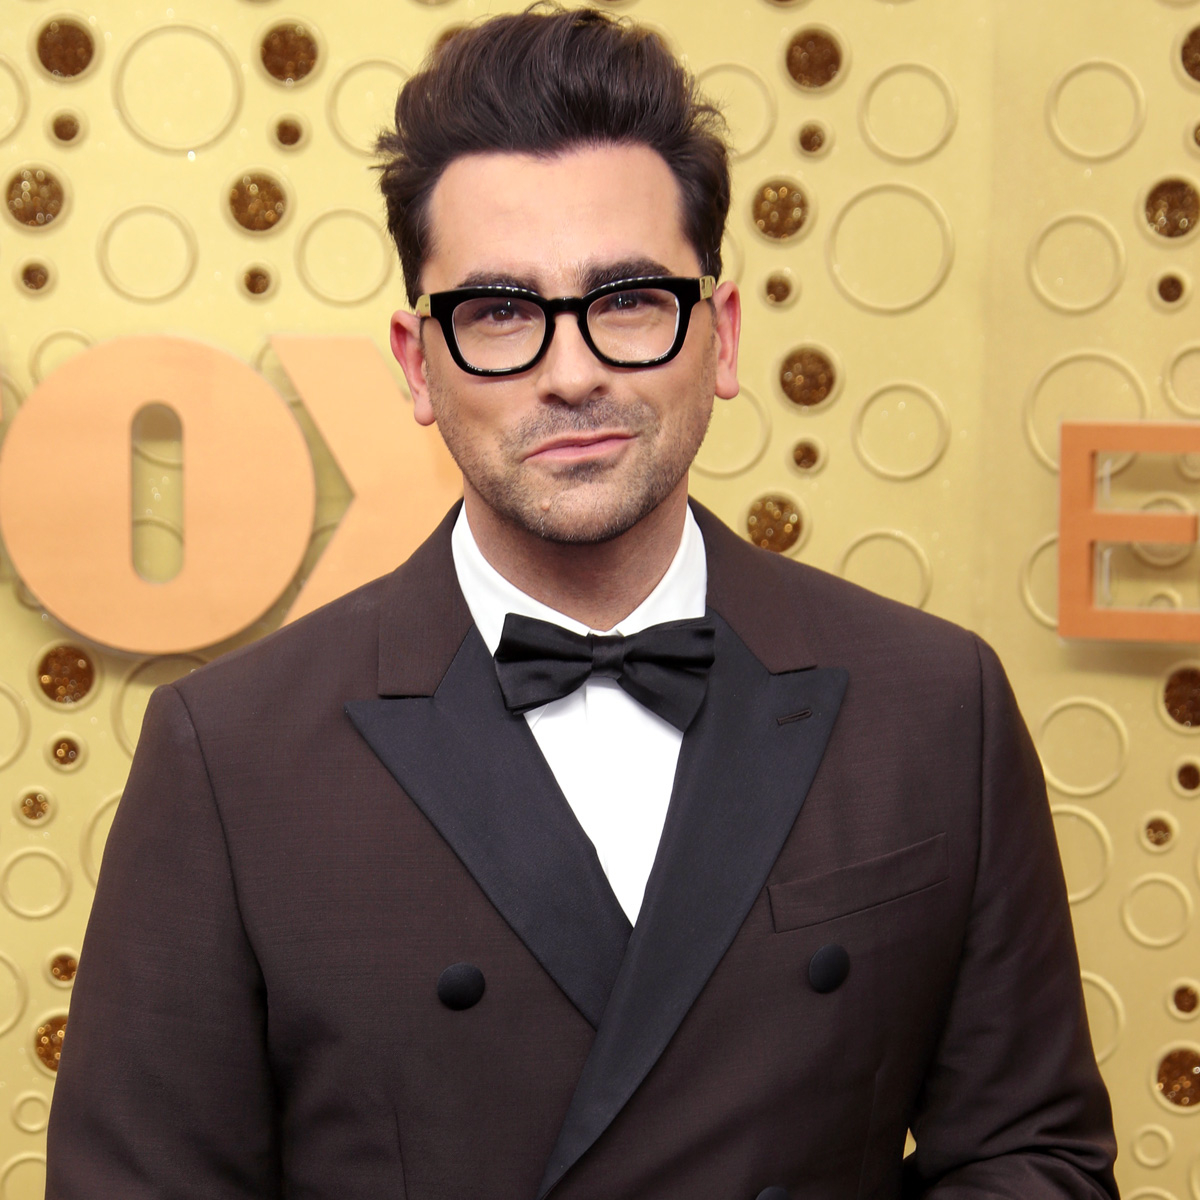 Is a Schitt’s Creek Reunion in the Works? Dan Levy Says…